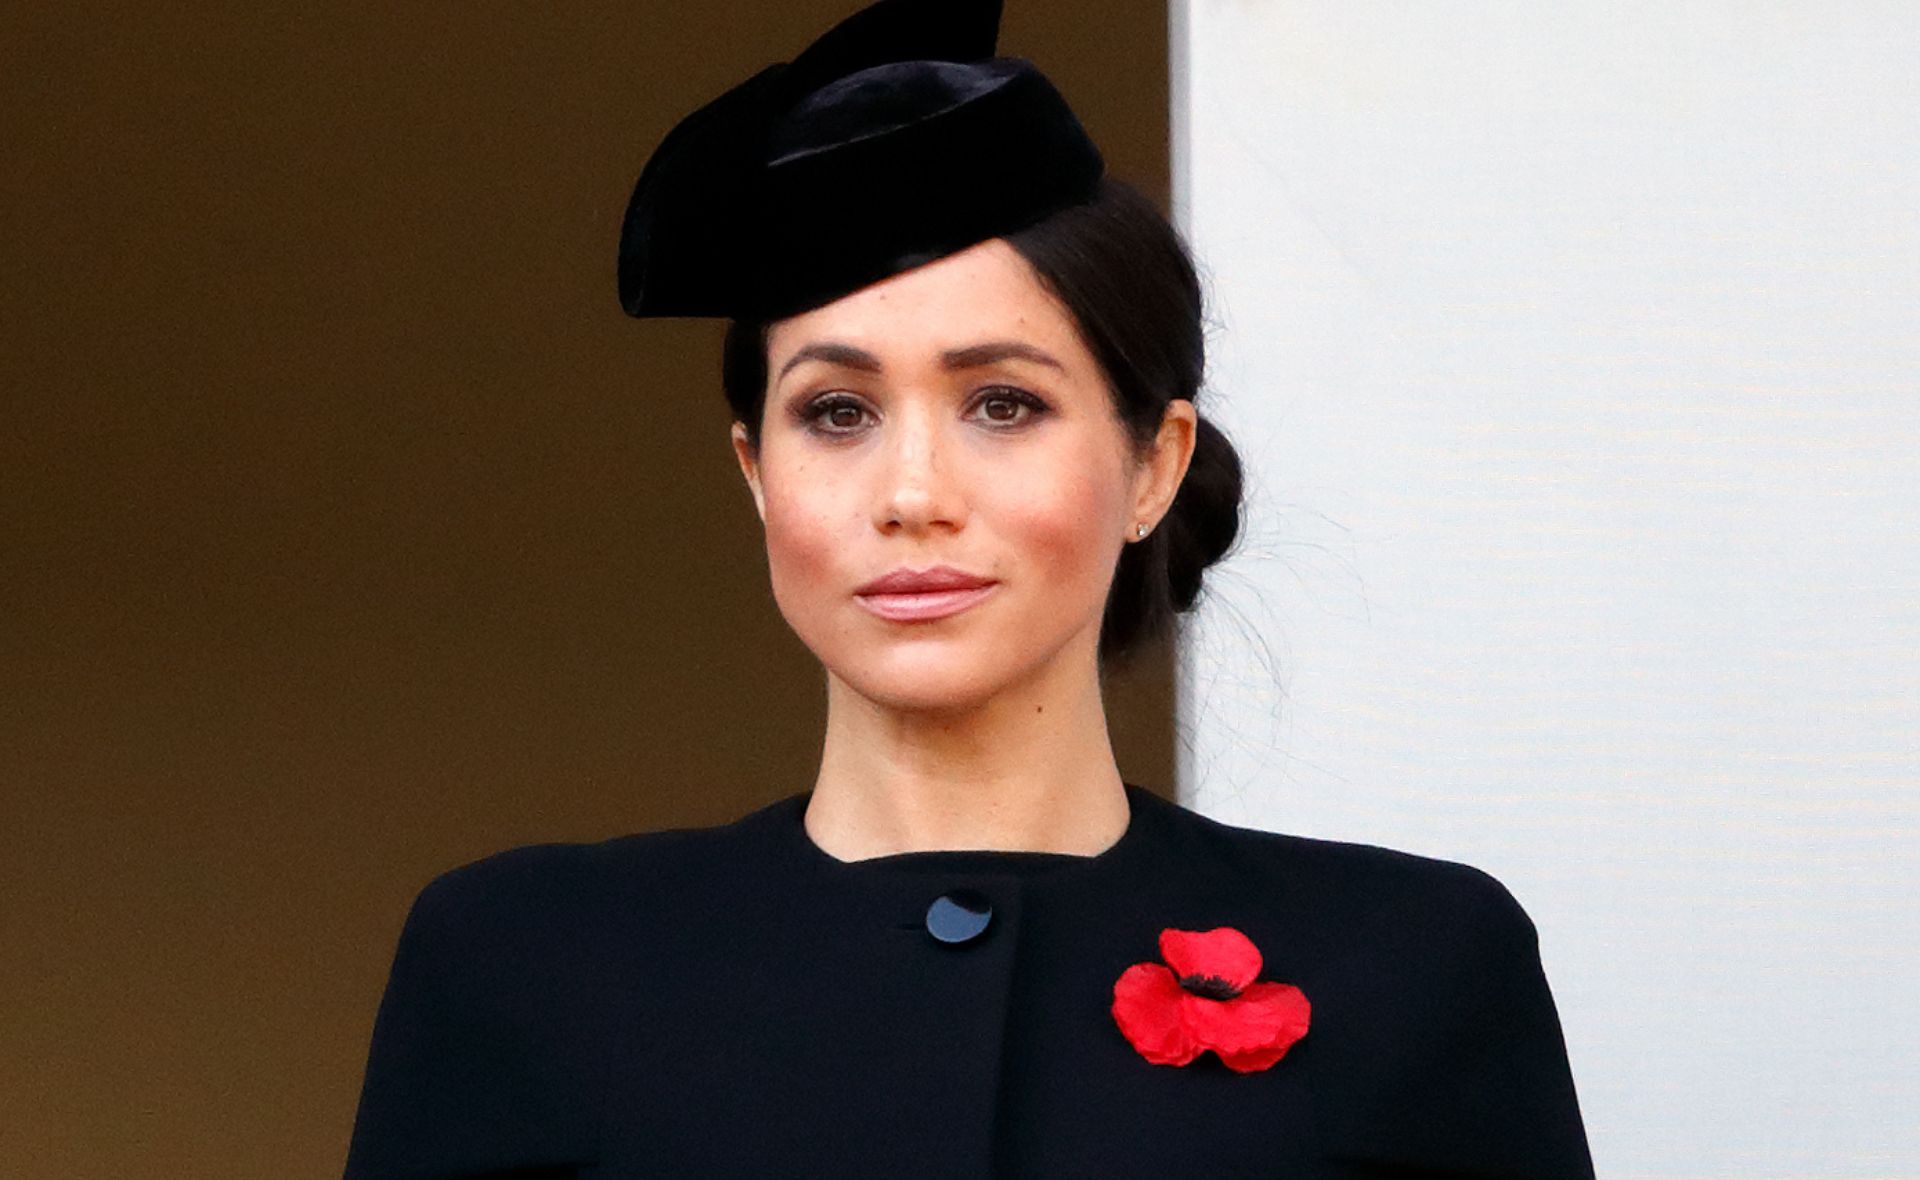 Here is the complete guest list for Meghan Markle’s new podcast, Archetypes